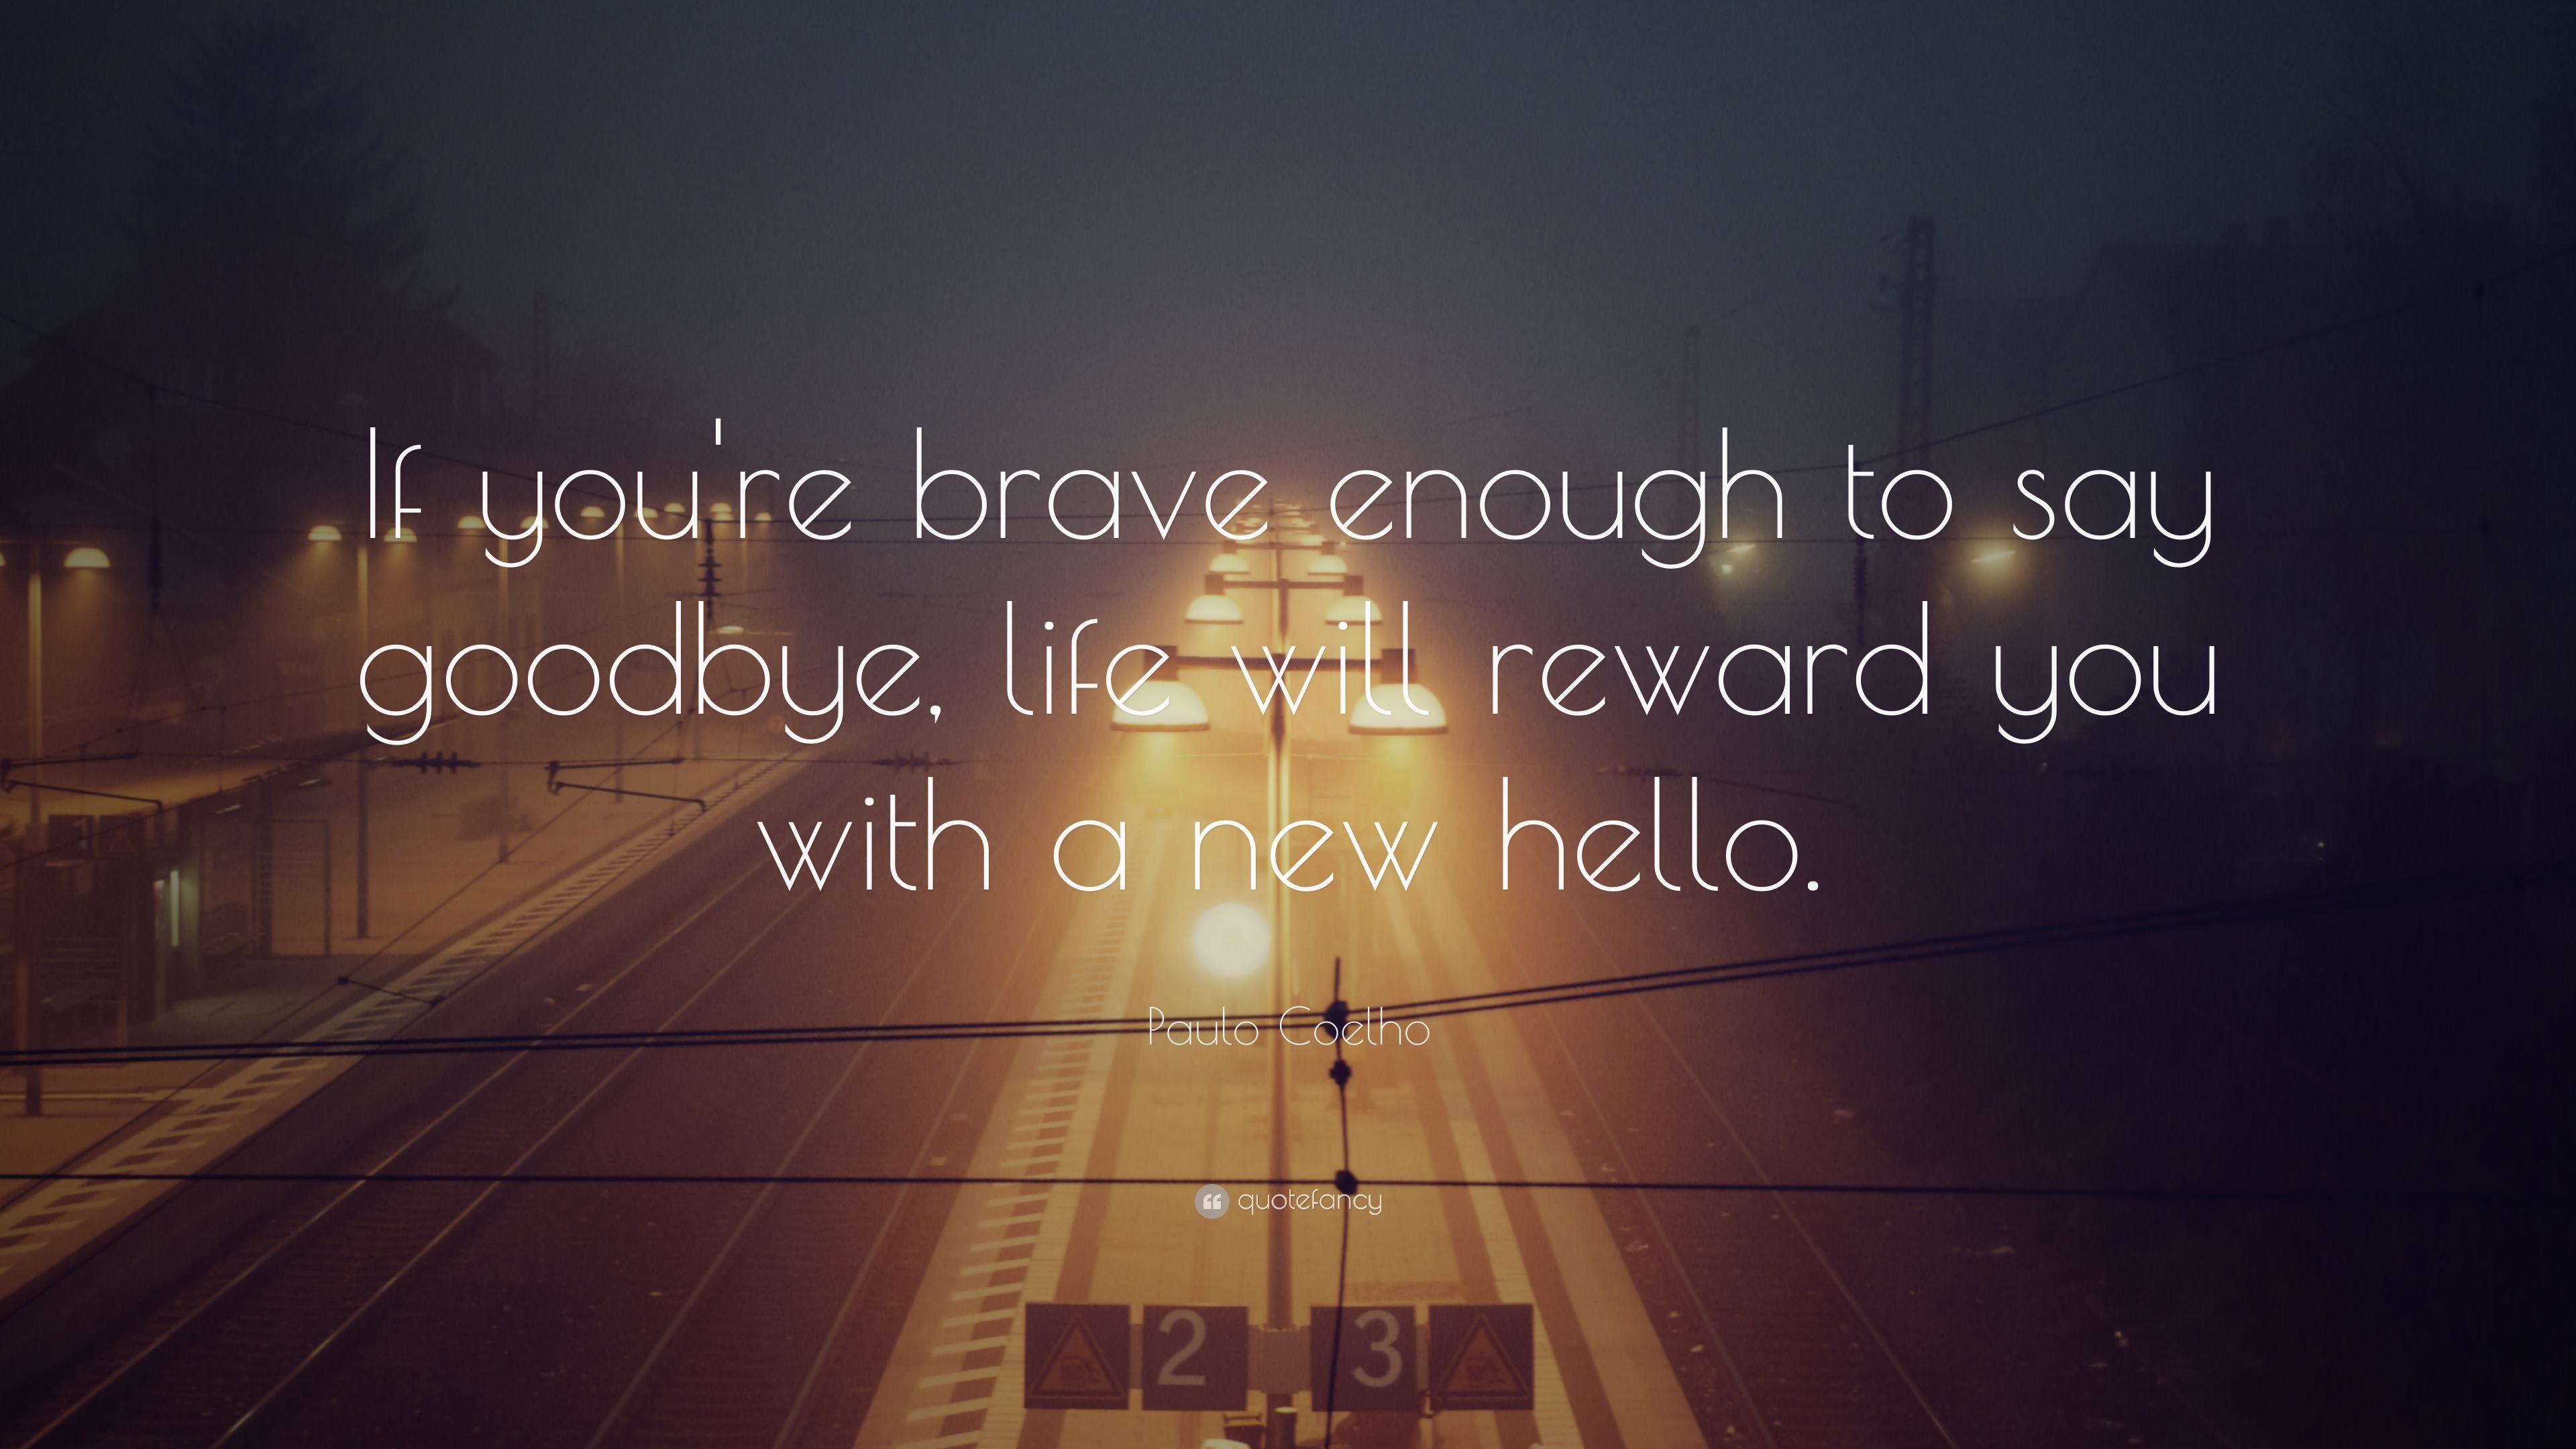 Paulo Coelho Quote “If you re brave enough to say goodbye life